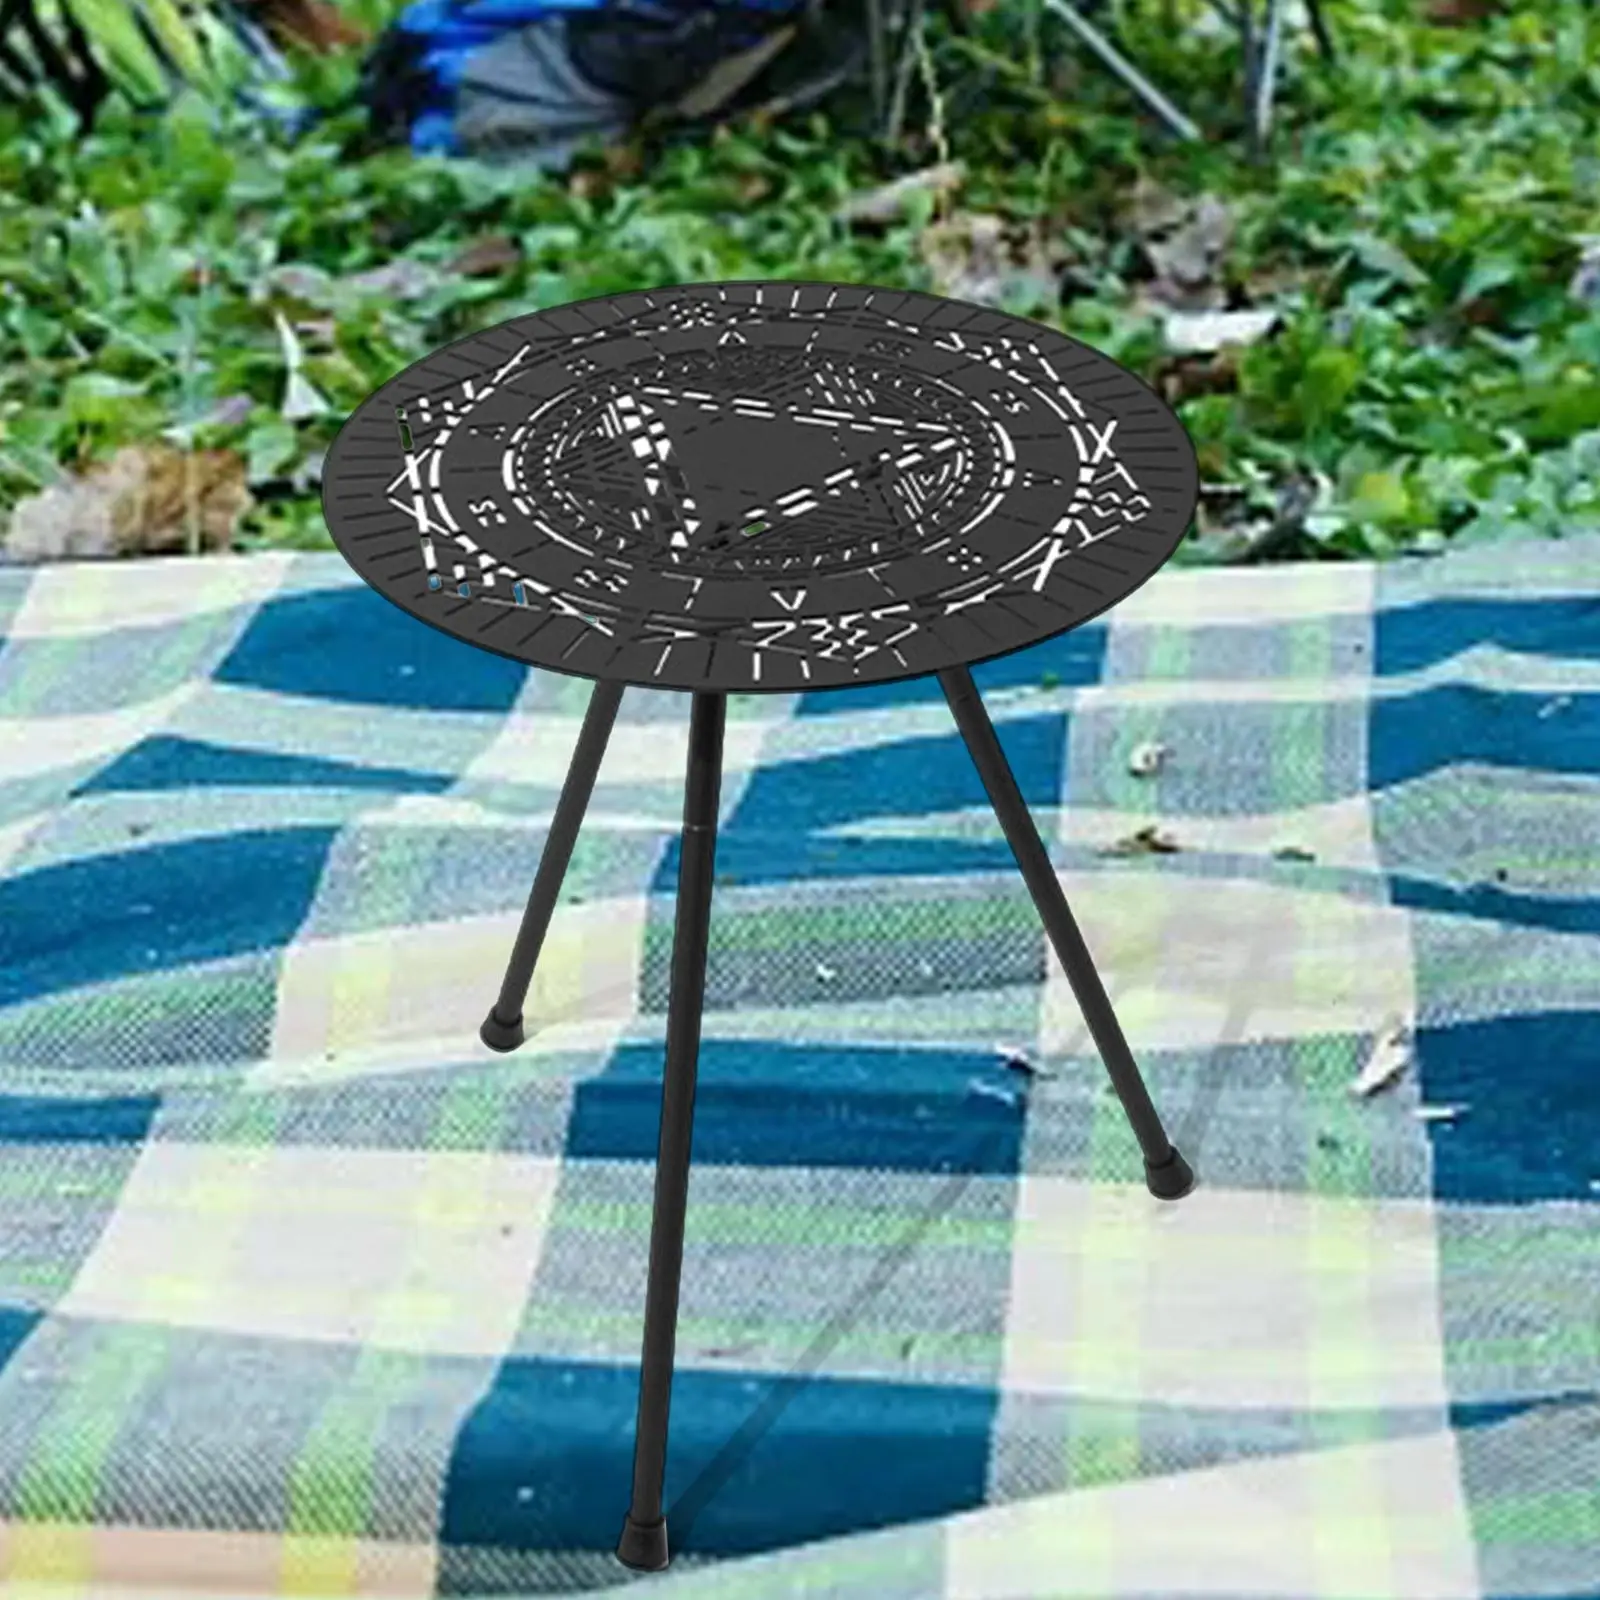 Camping Coffee Table Collapsible Lightweight Durable Adjustable Camping Table Detachable for Outdoor Backyard Yard Garden Picnic